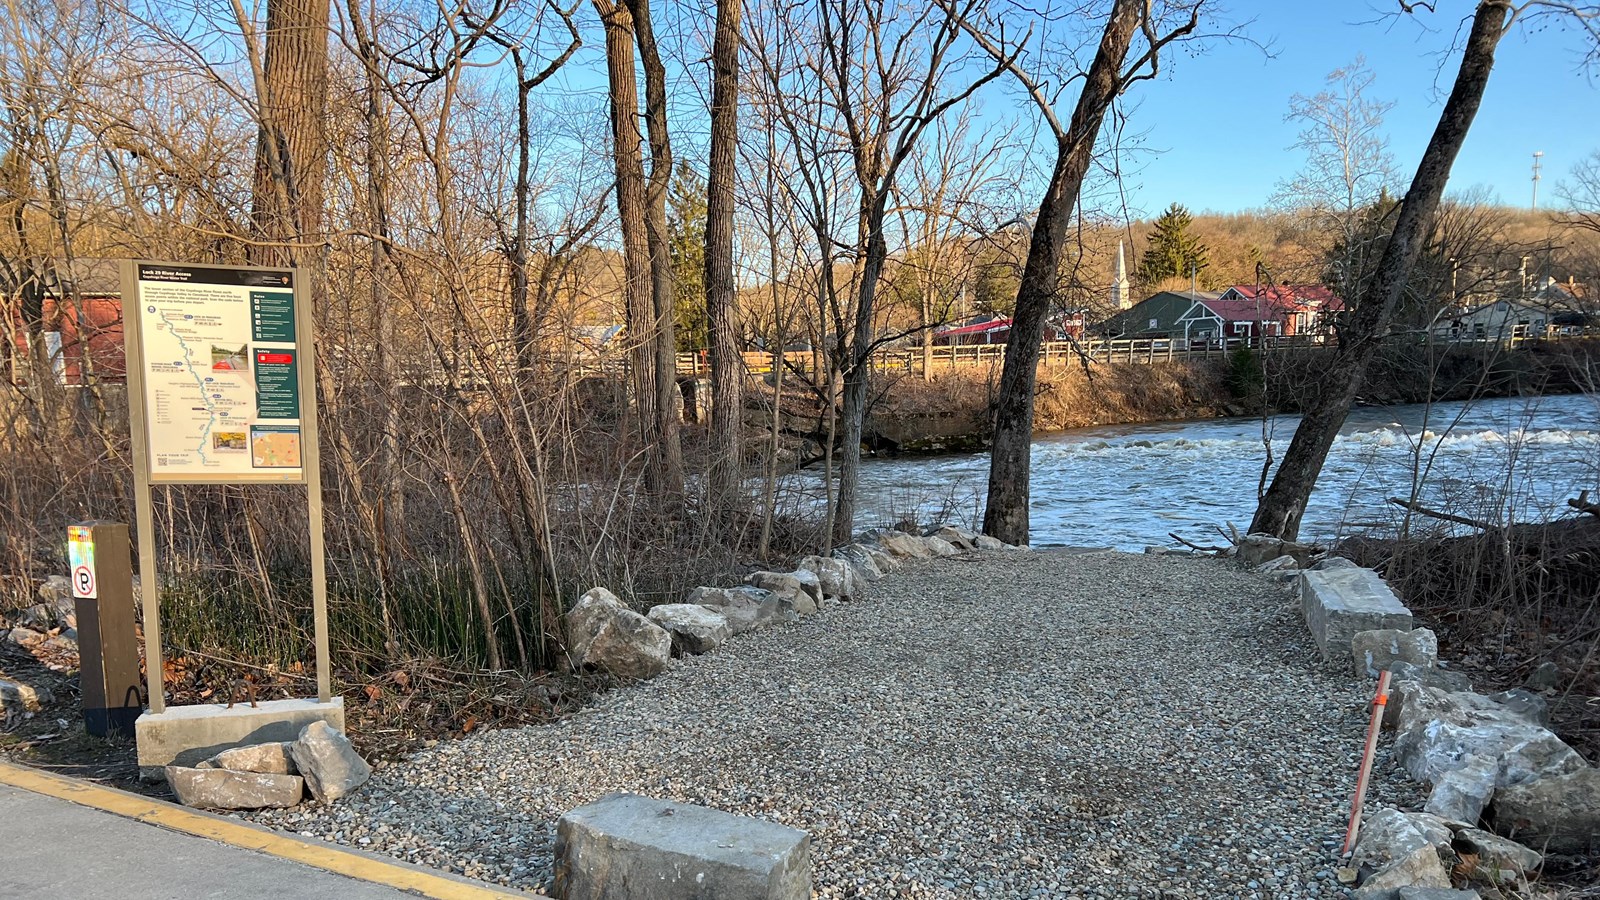 A gravel path lined with large rocks and trees leads to the river. To the left is an information pan